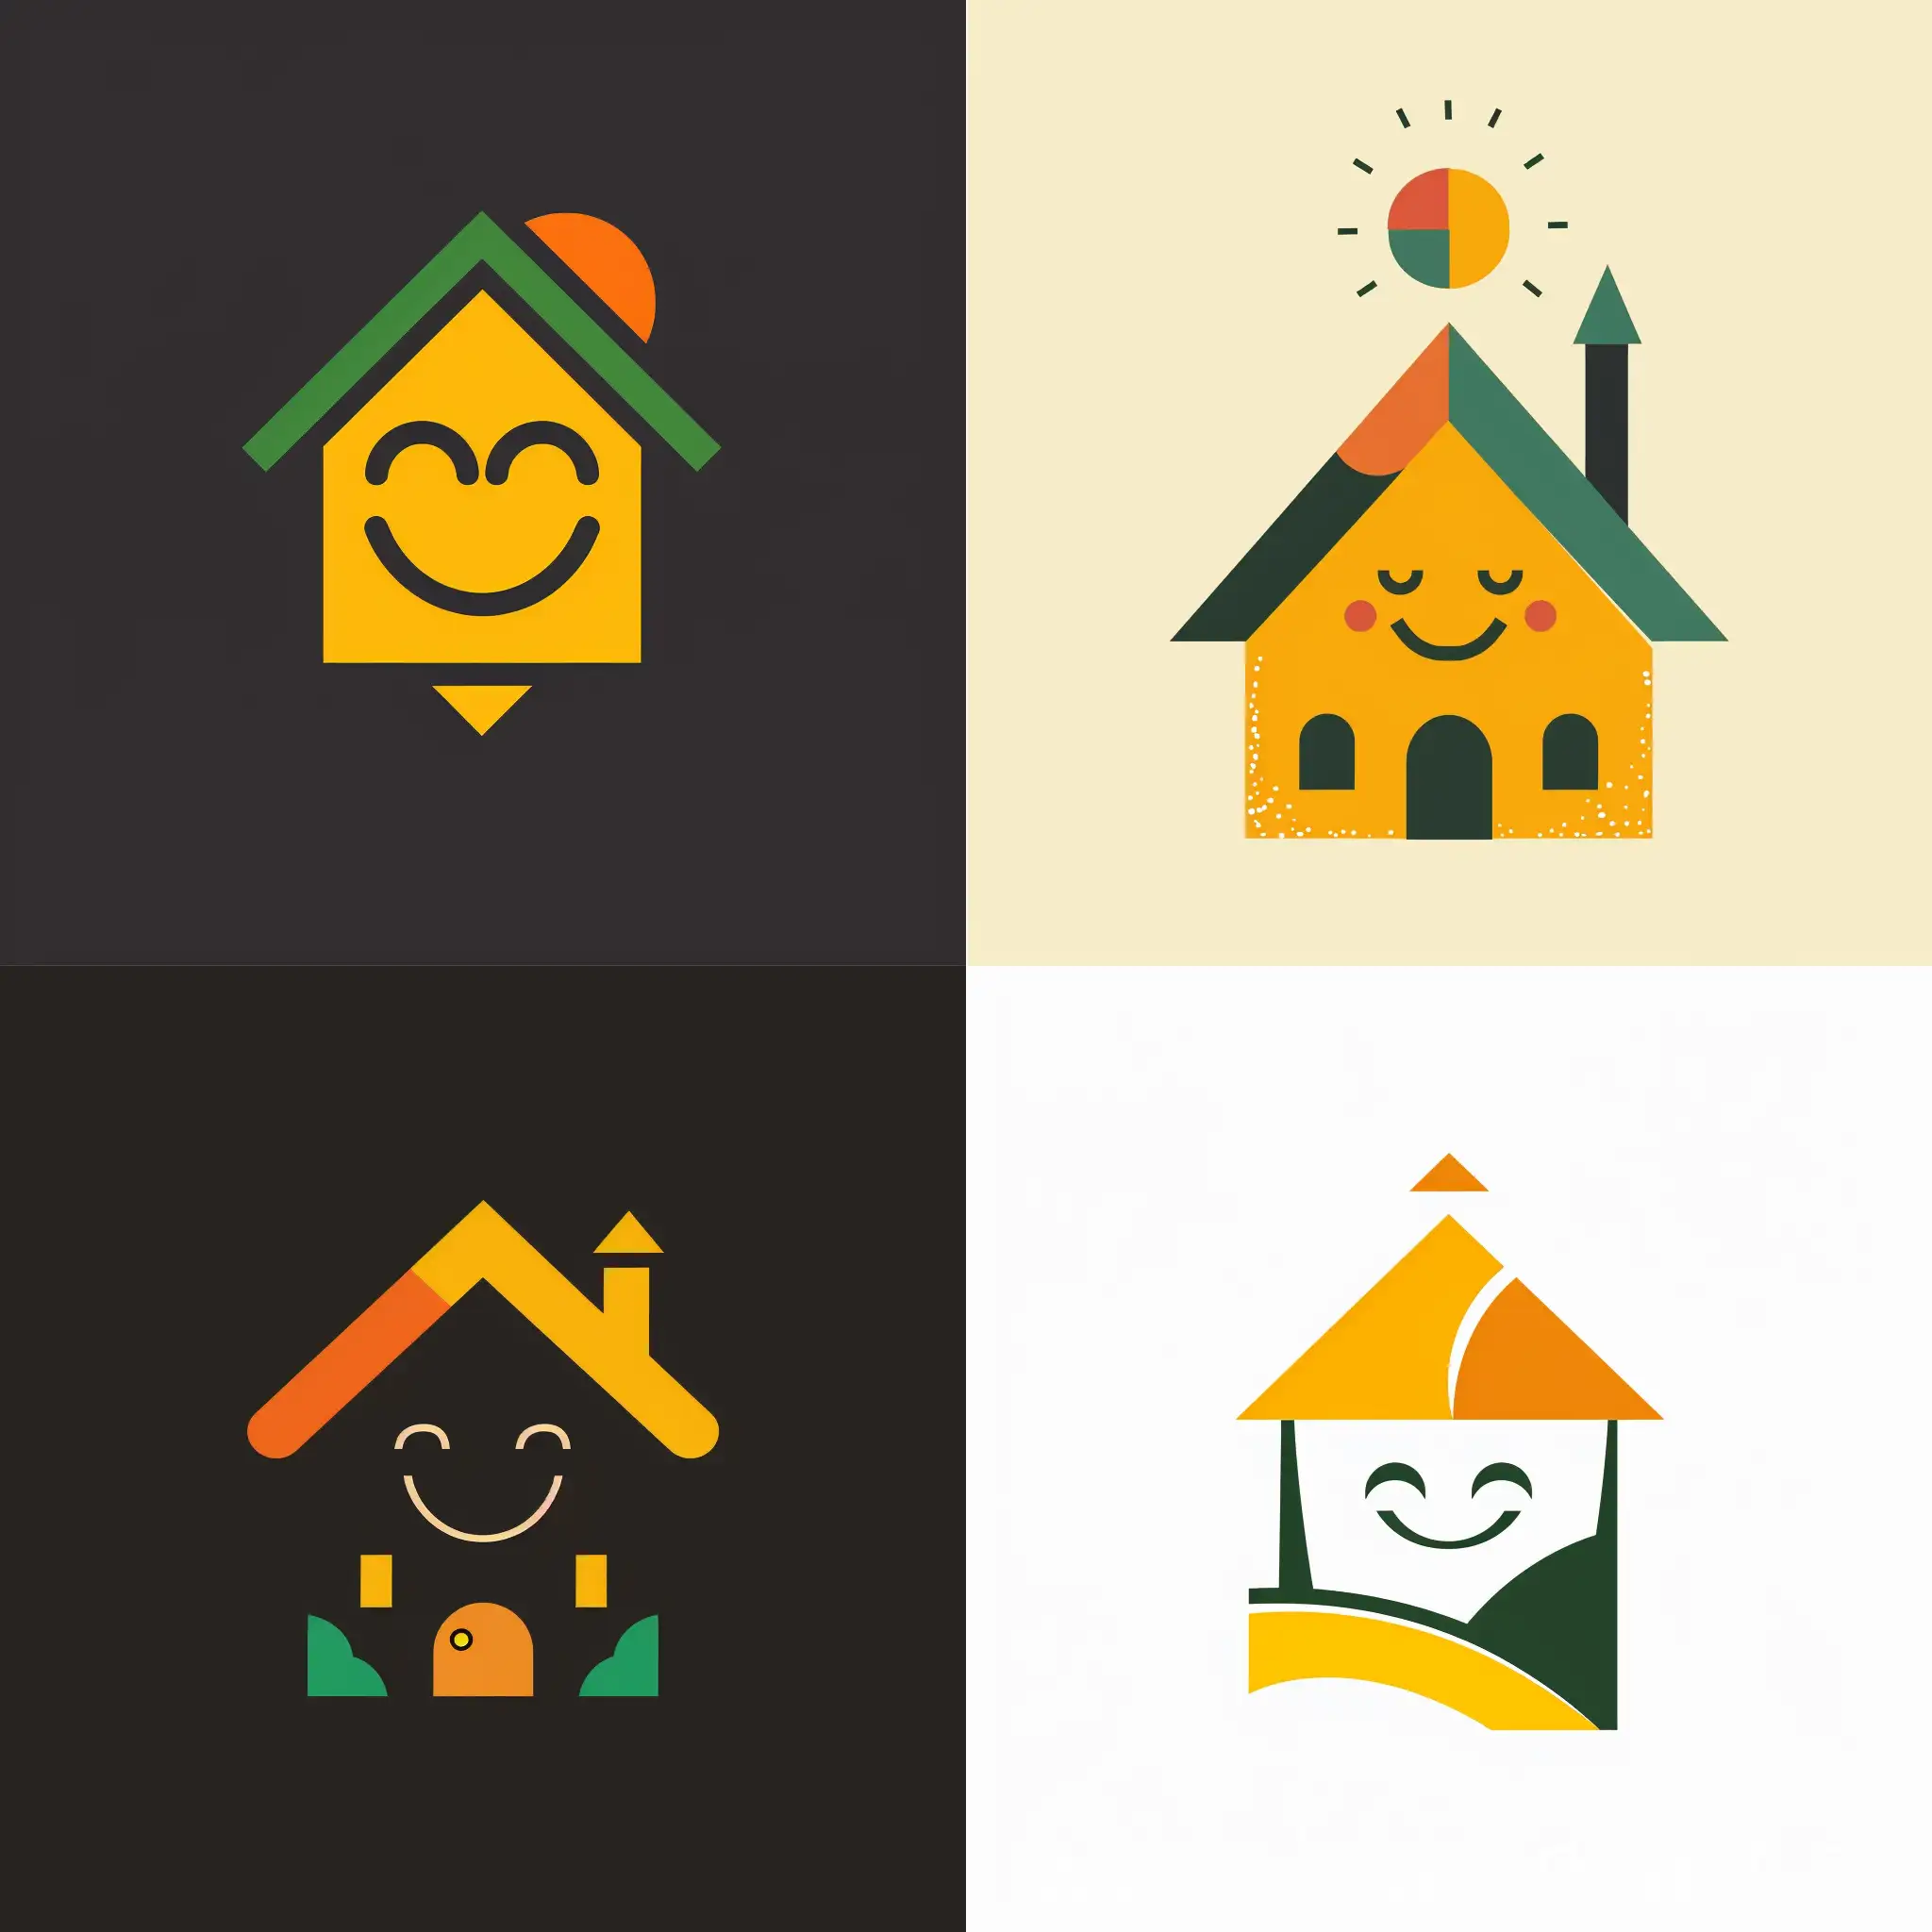 Logo: minimalistic house without details, without shadows, smile on a house without eyes, strict style, accent on the roof, yellow, orange, green colors